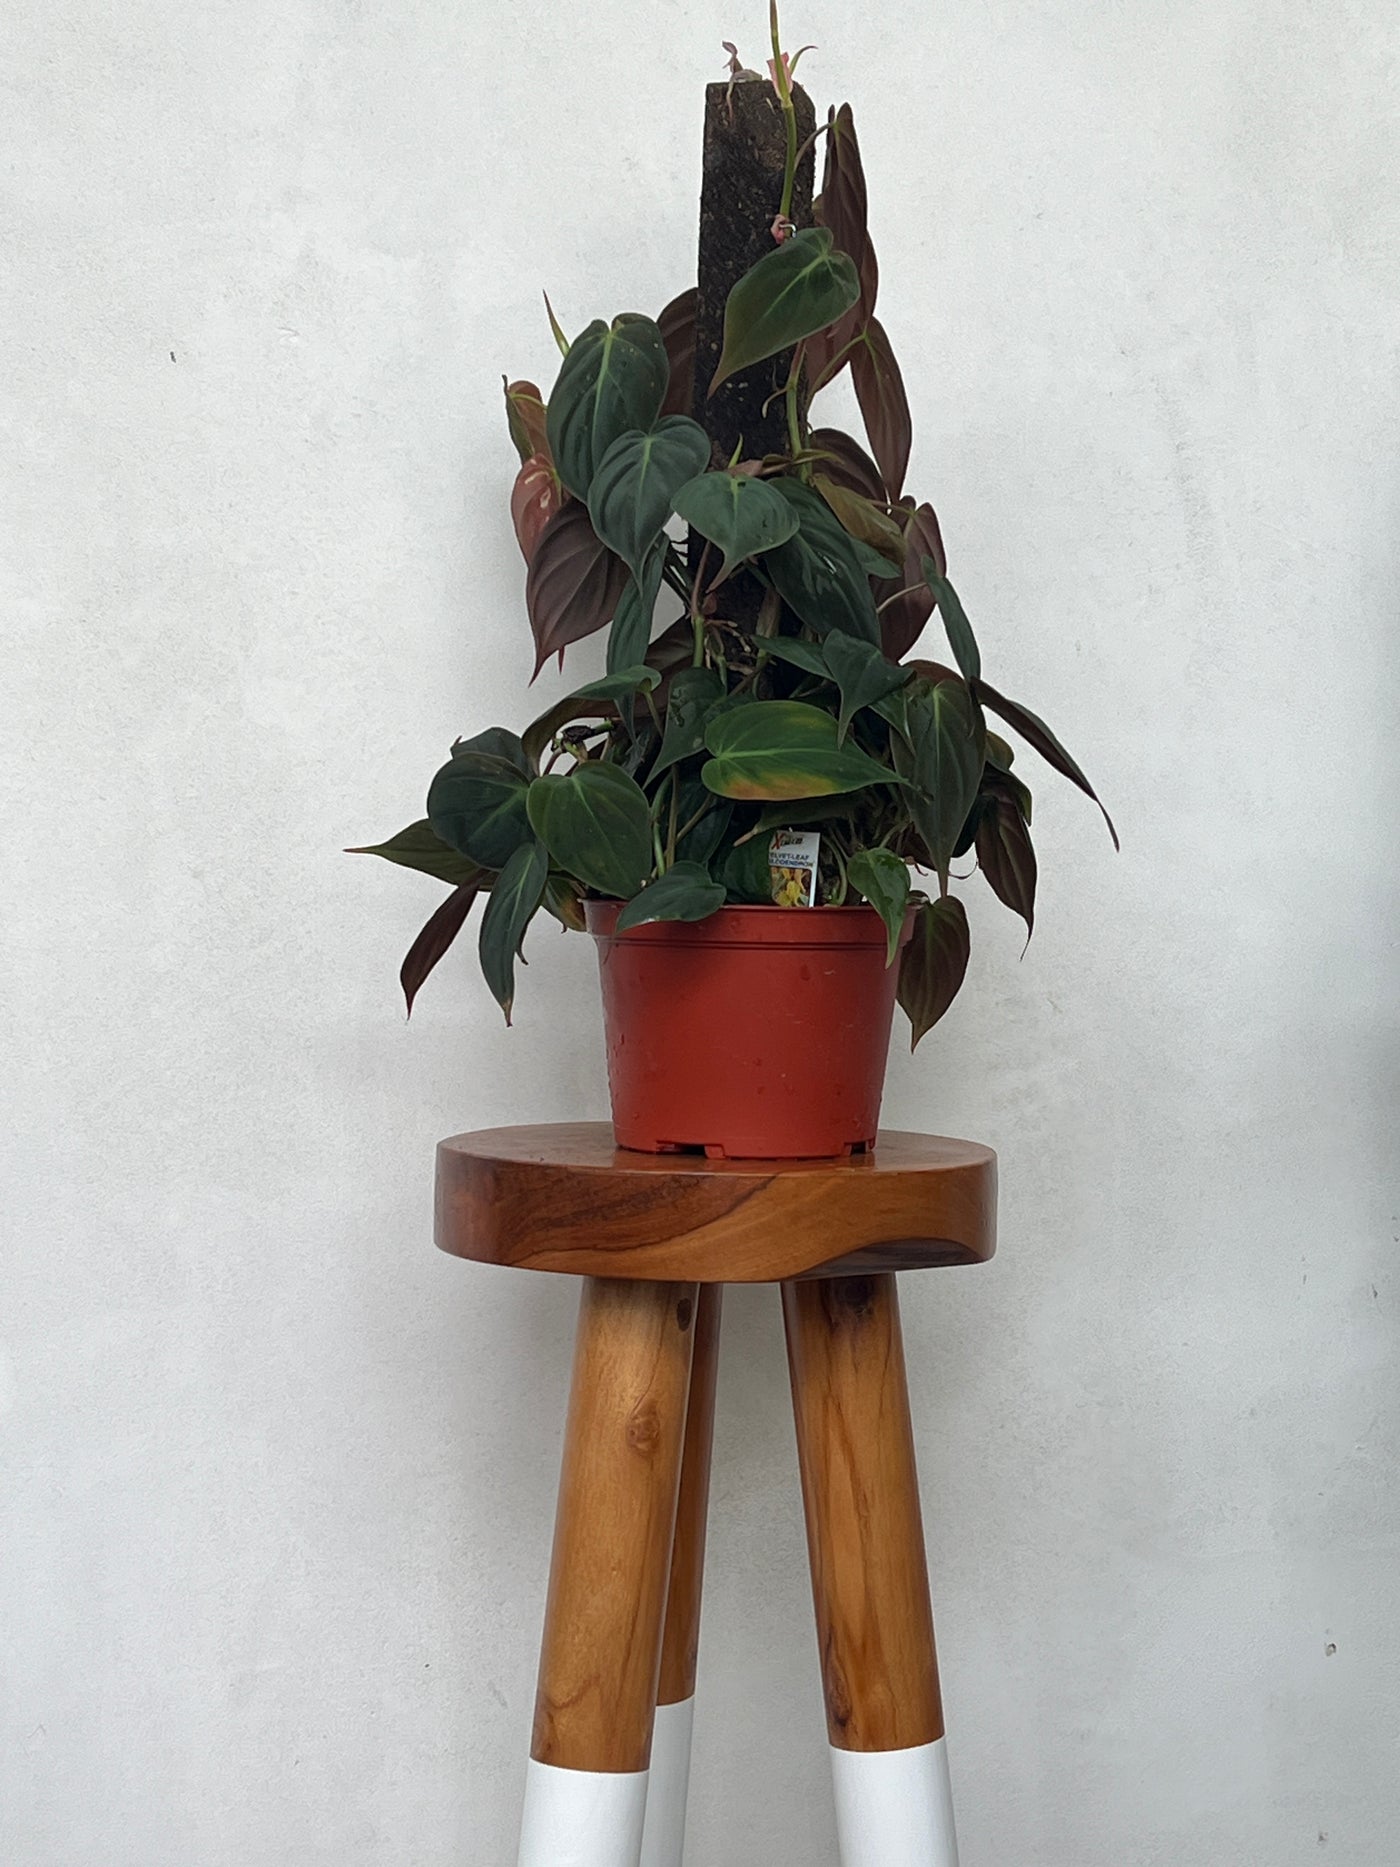 Philodendron Hederaceum Micans on Moss Pole - For Sale in Encinitas California at Plant Vault